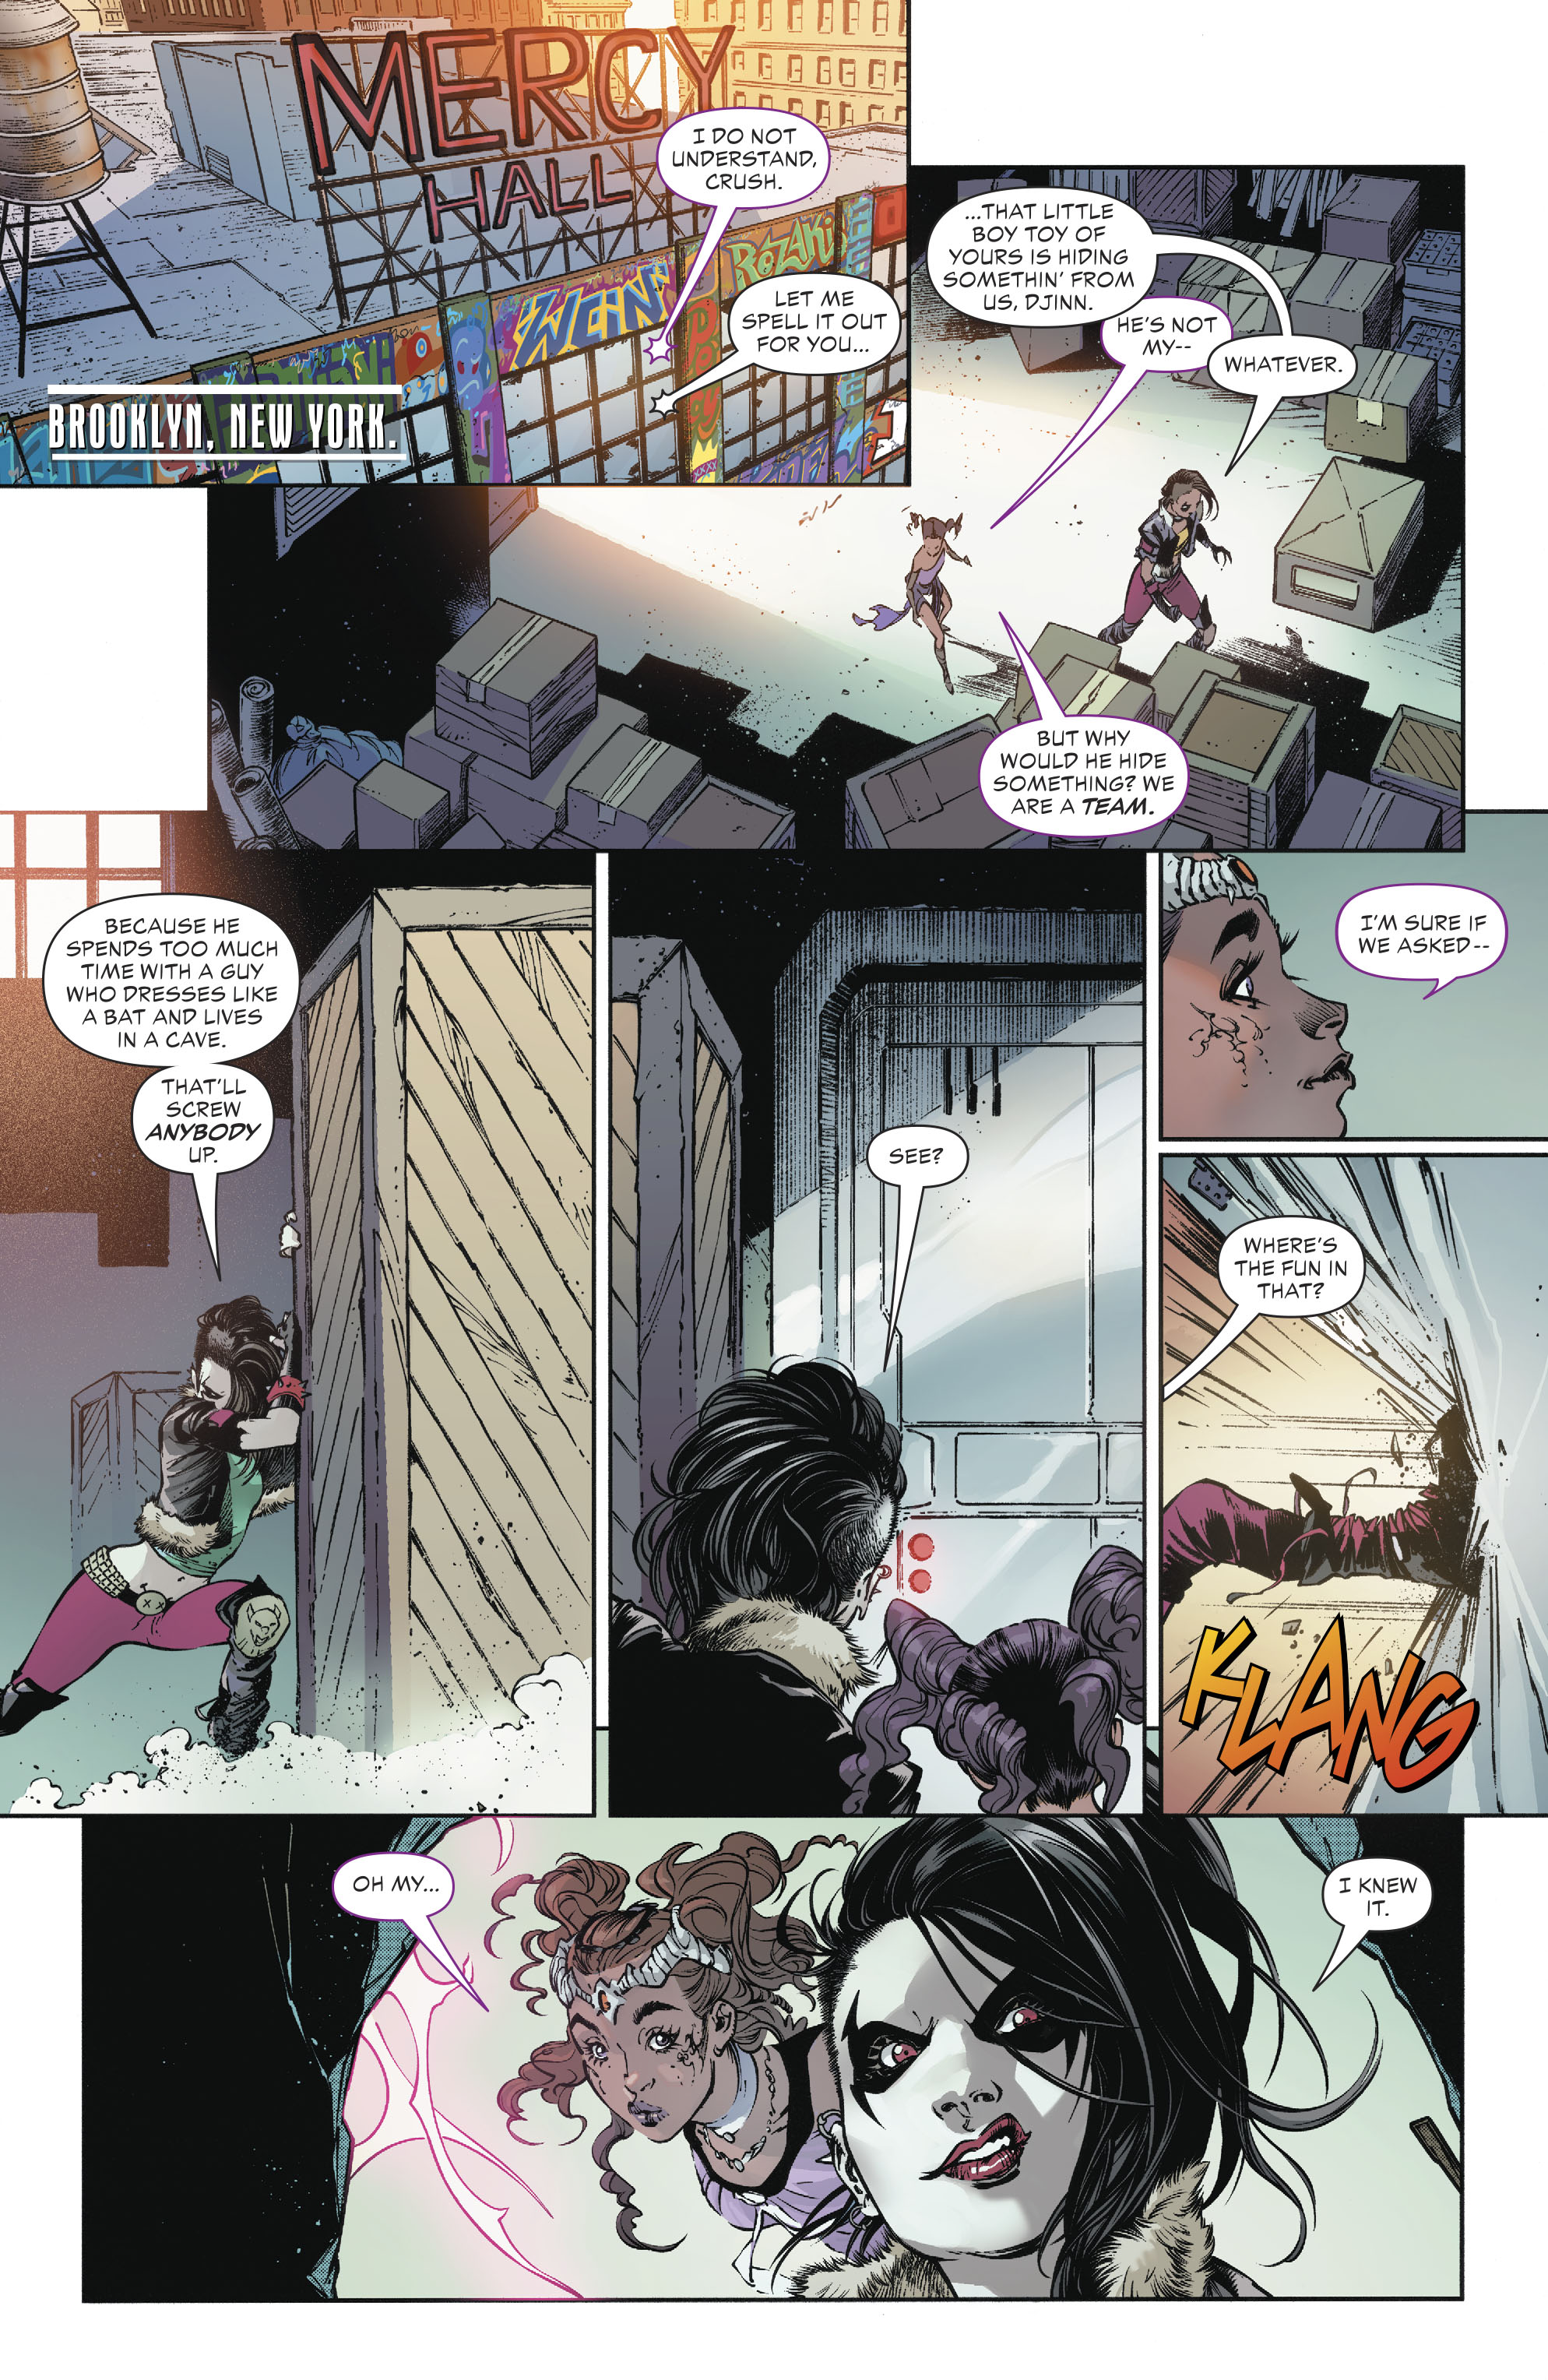 Teen Titans (2016-): Chapter 25 - Page 4